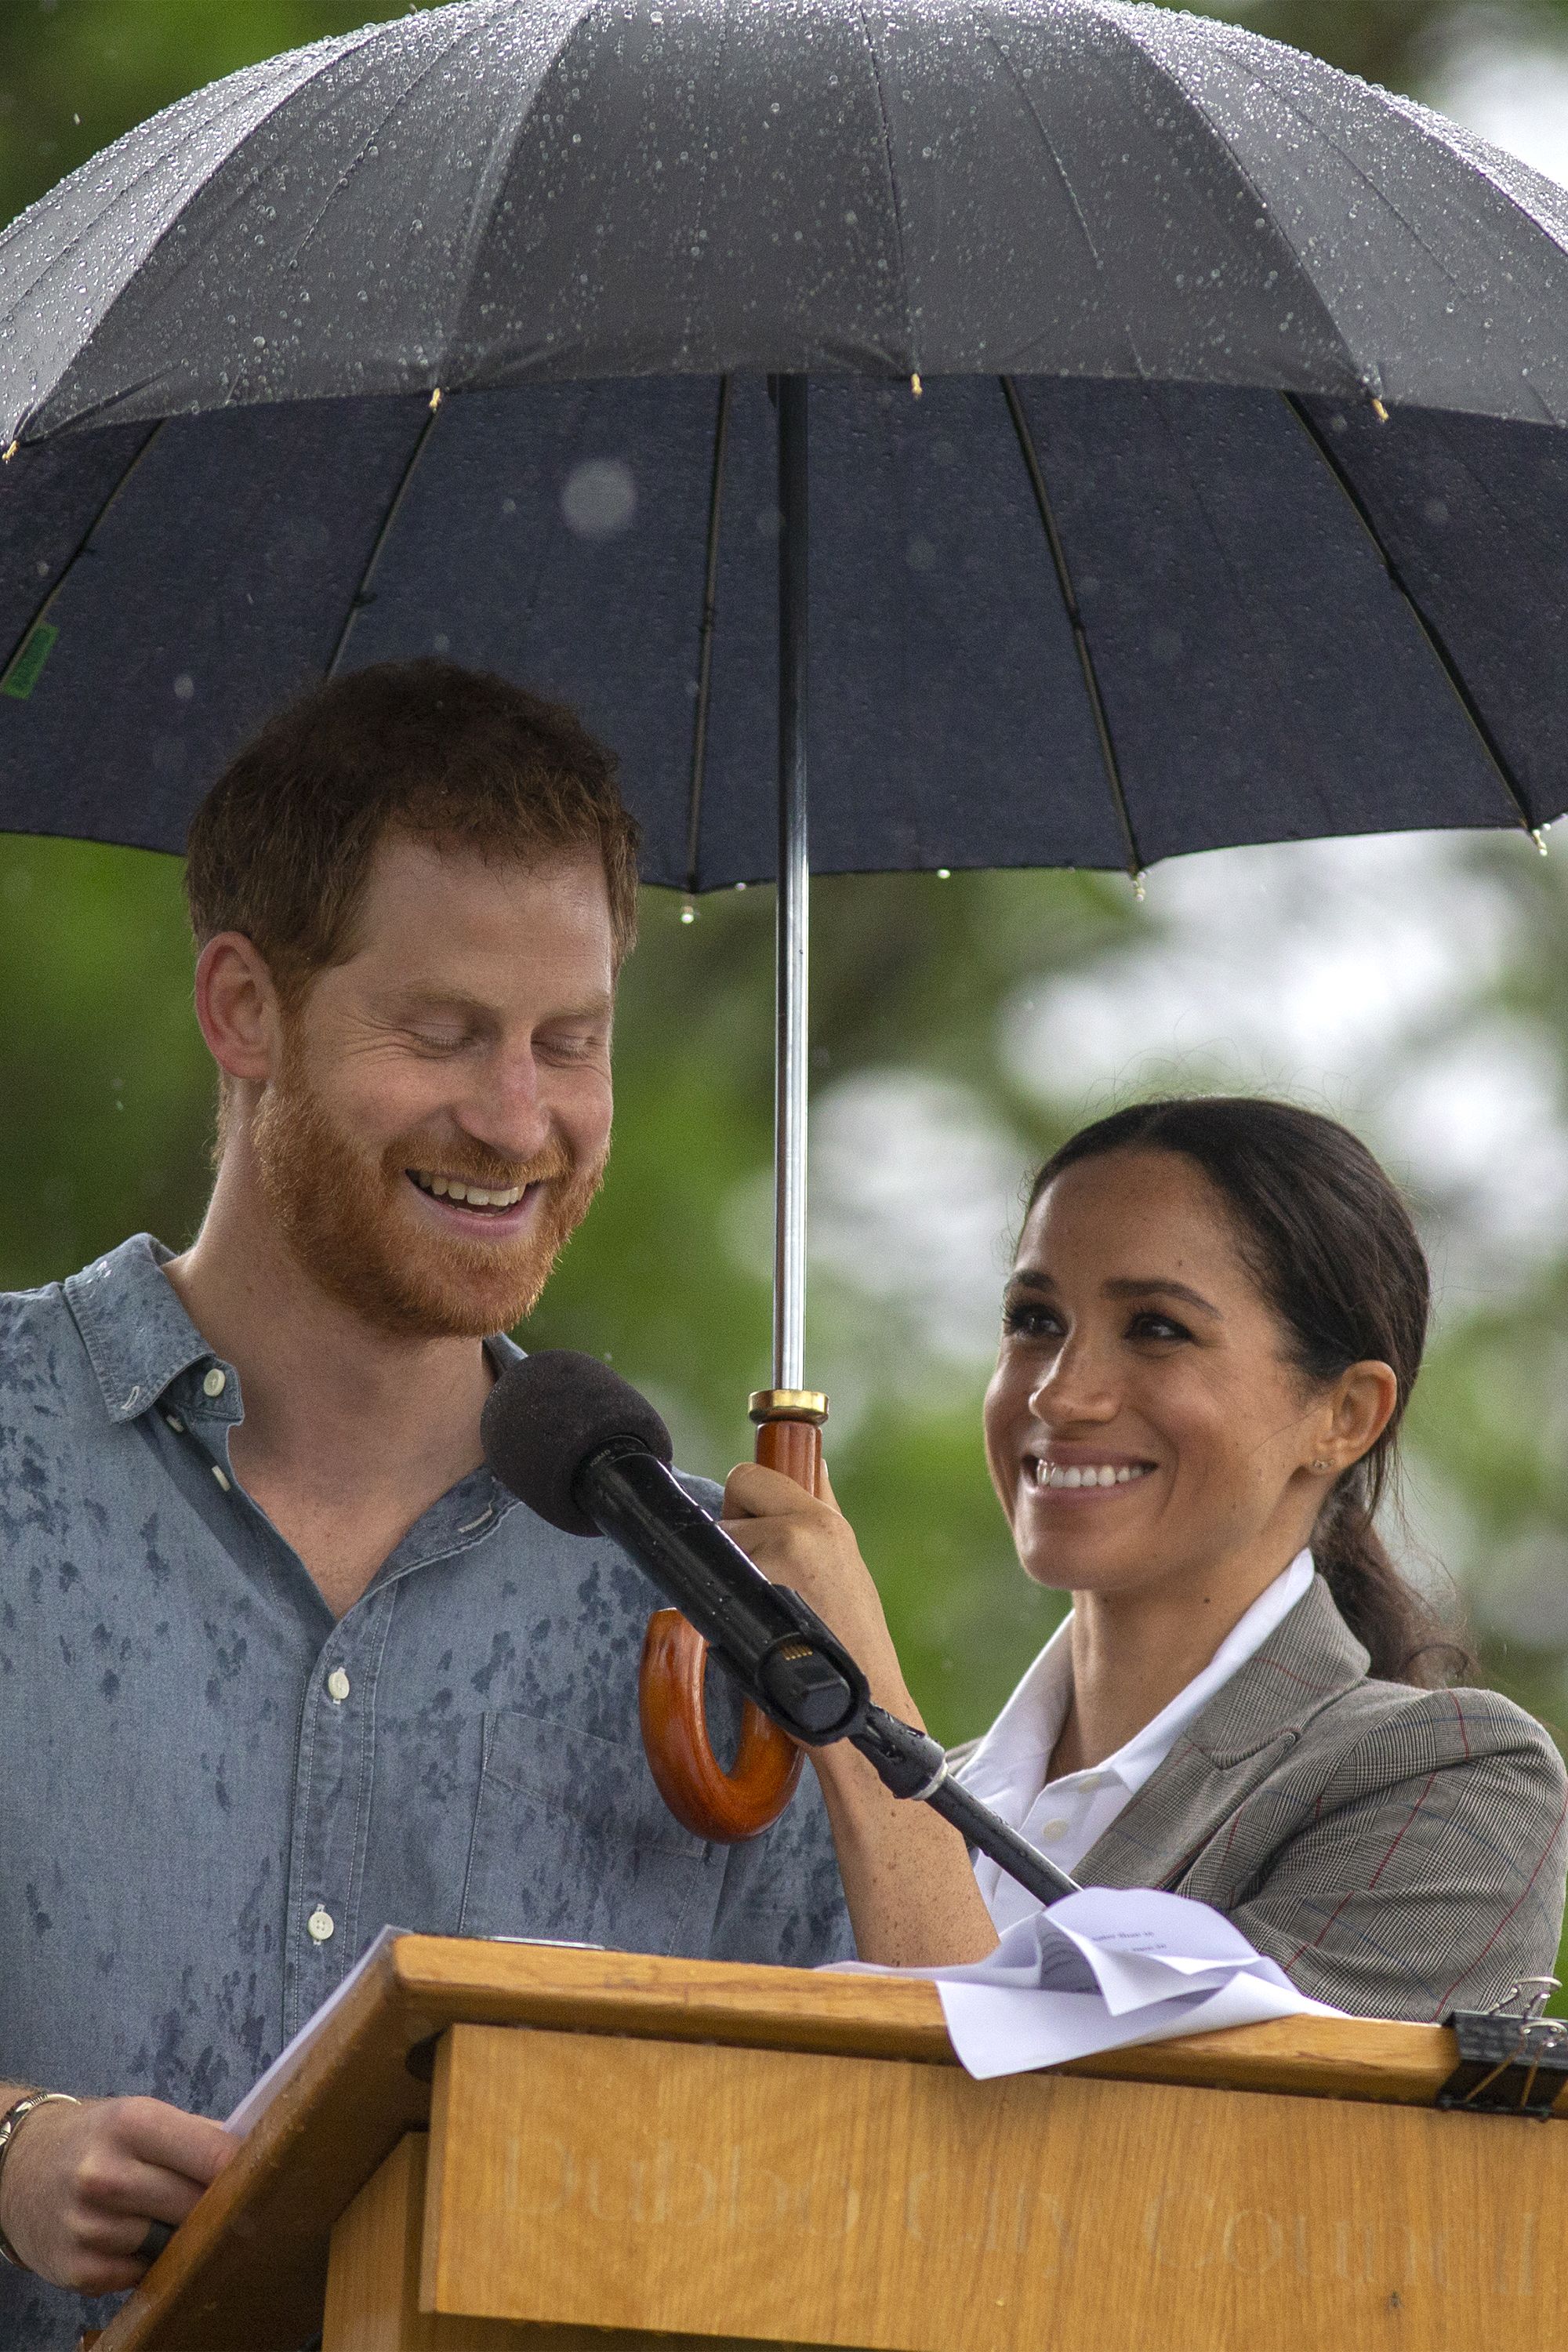 https://hips.hearstapps.com/hmg-prod.s3.amazonaws.com/images/hbz-prince-harry-meghan-markle-cute-moments-2018-10-gettyimages-1052327300.jpg?crop=1xw:1xh;center,top